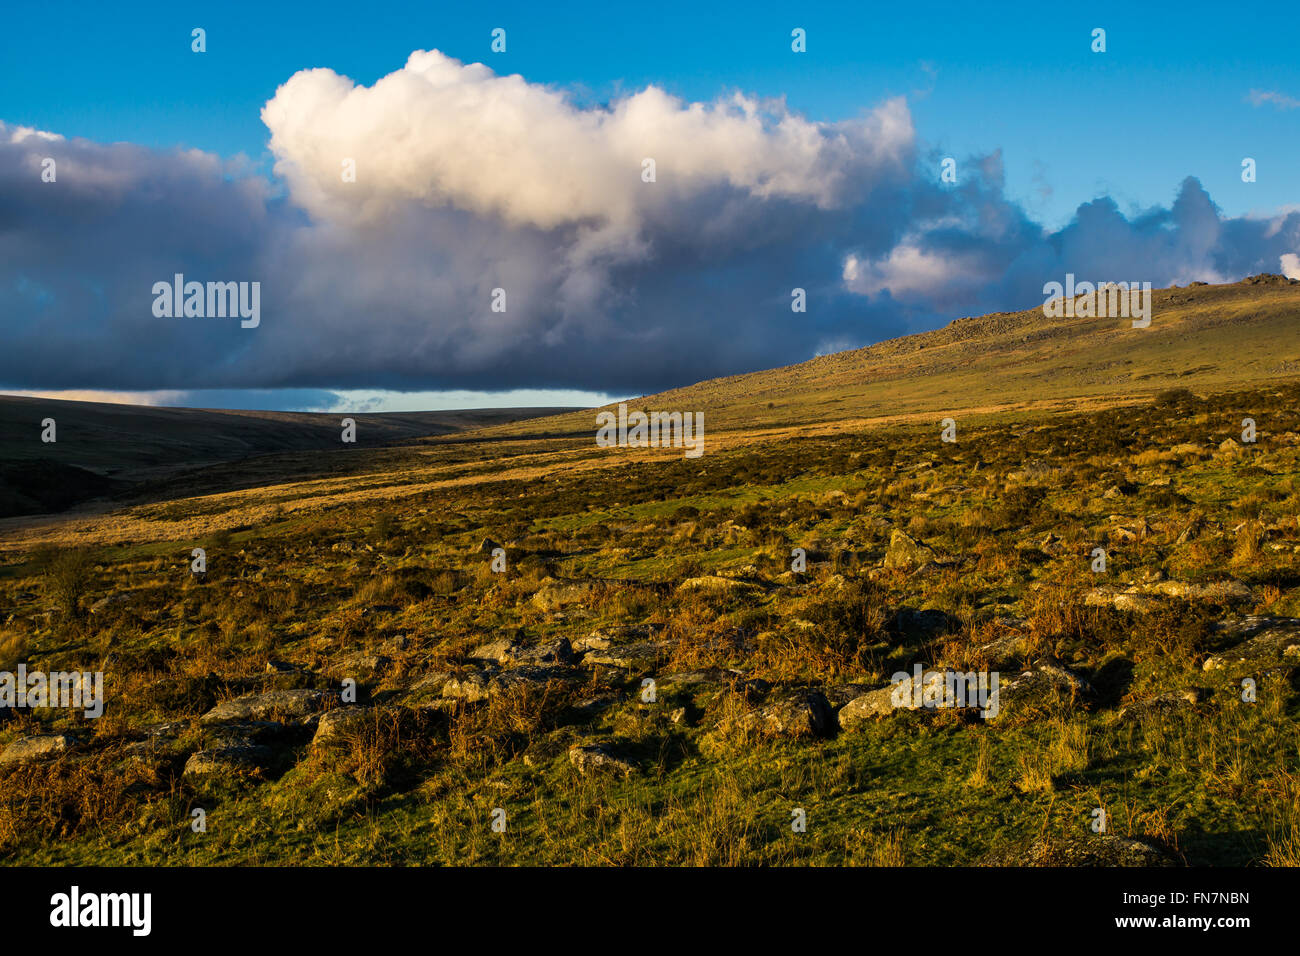 Fields, hills and grass in Dartmoor, England. Stock Photo